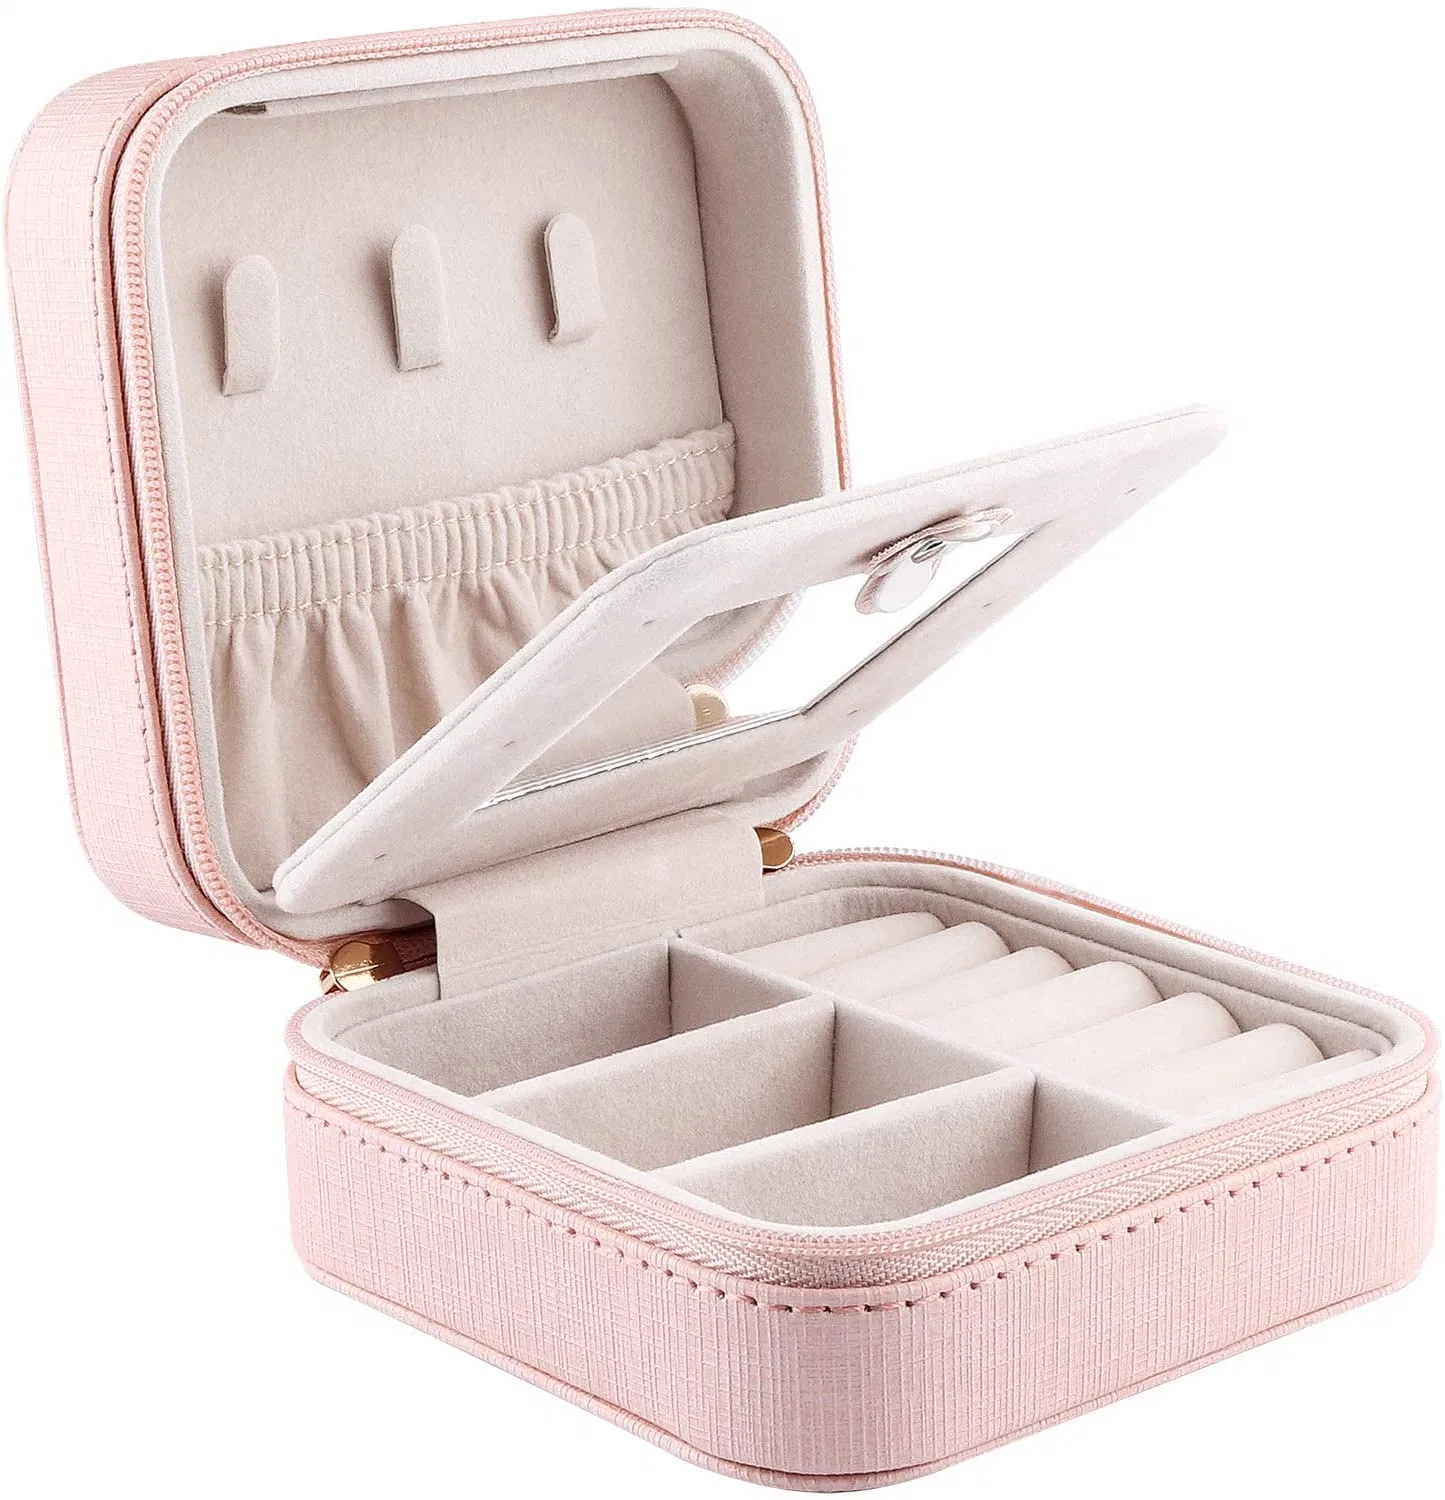 Lady Fashion Travel Jewelry Box Travel Mini Organizer Portable Display Storage Case for Rings Earrings Necklace